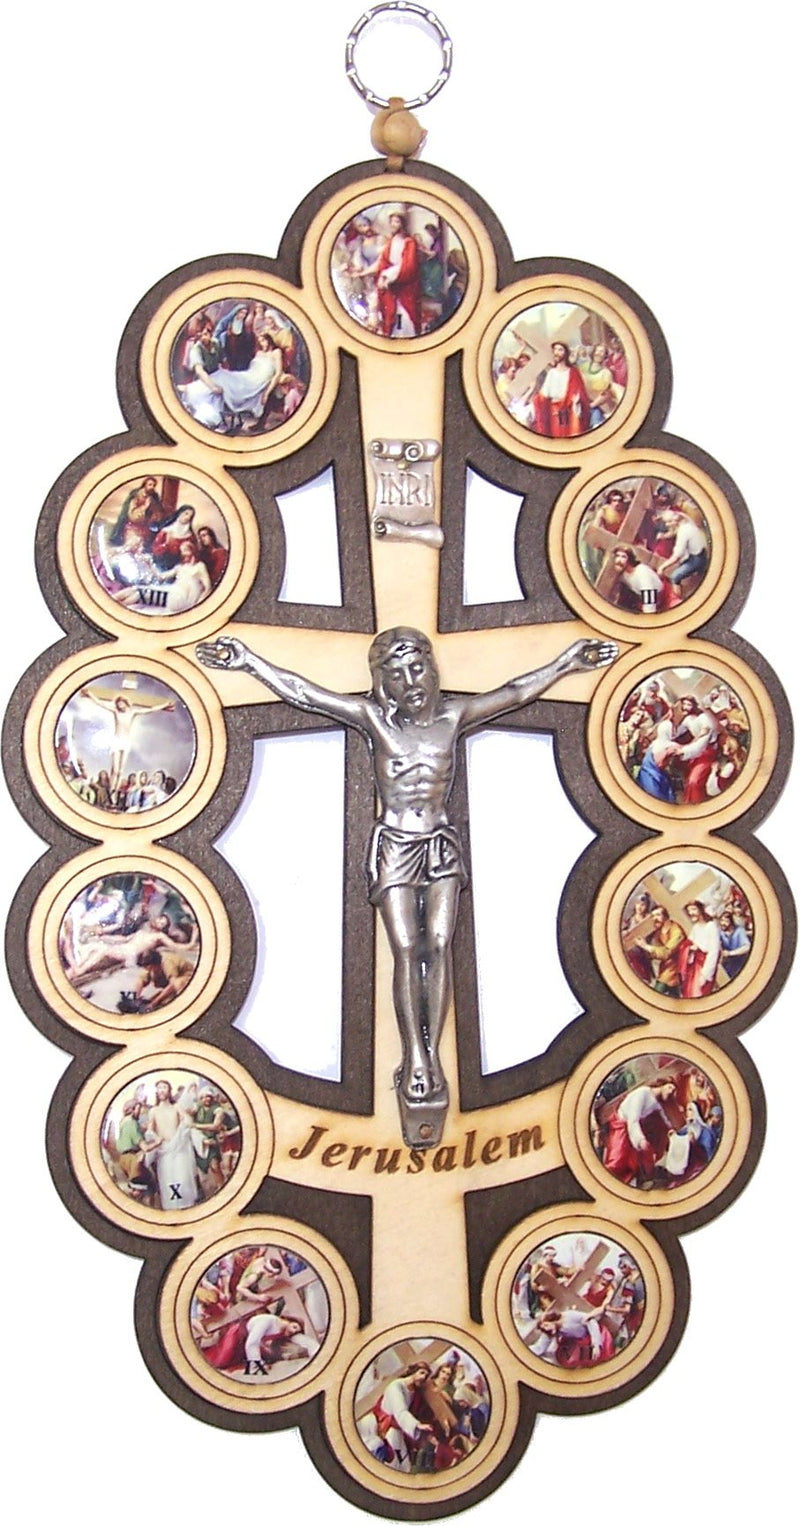 Holy Land Market Two colors/tones wooden Crucifix - icon showing 14 Stations of the Cross from Bethlehem